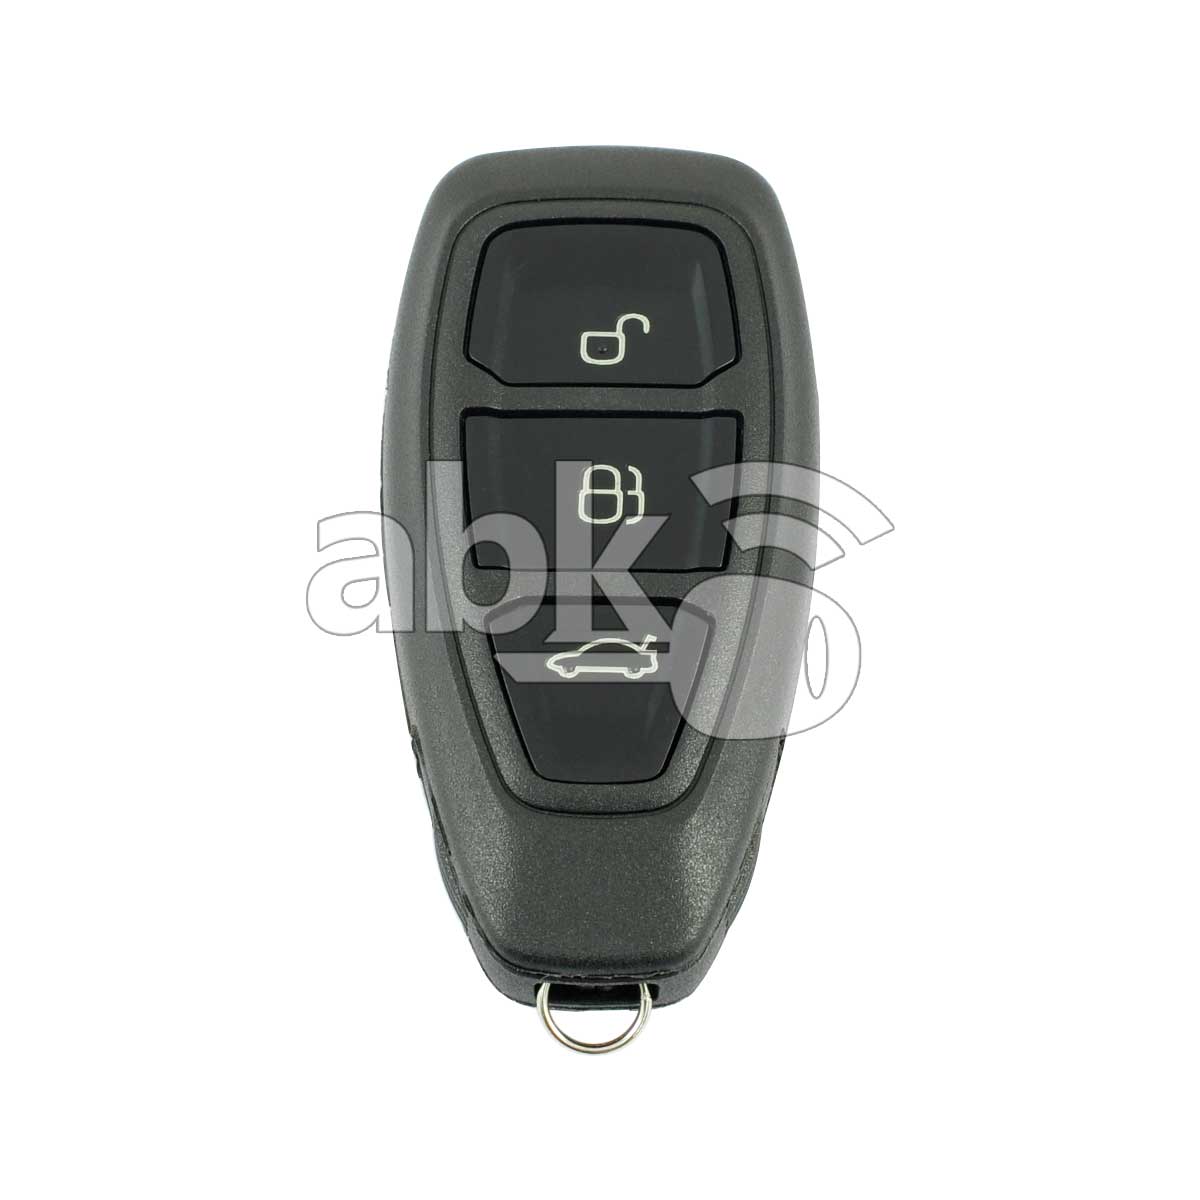 Ford Focus C-Max 2015+ Smart Key 3Buttons 2178773 1925235 2027592 433MHz KR5876268 - ABK-2401 -